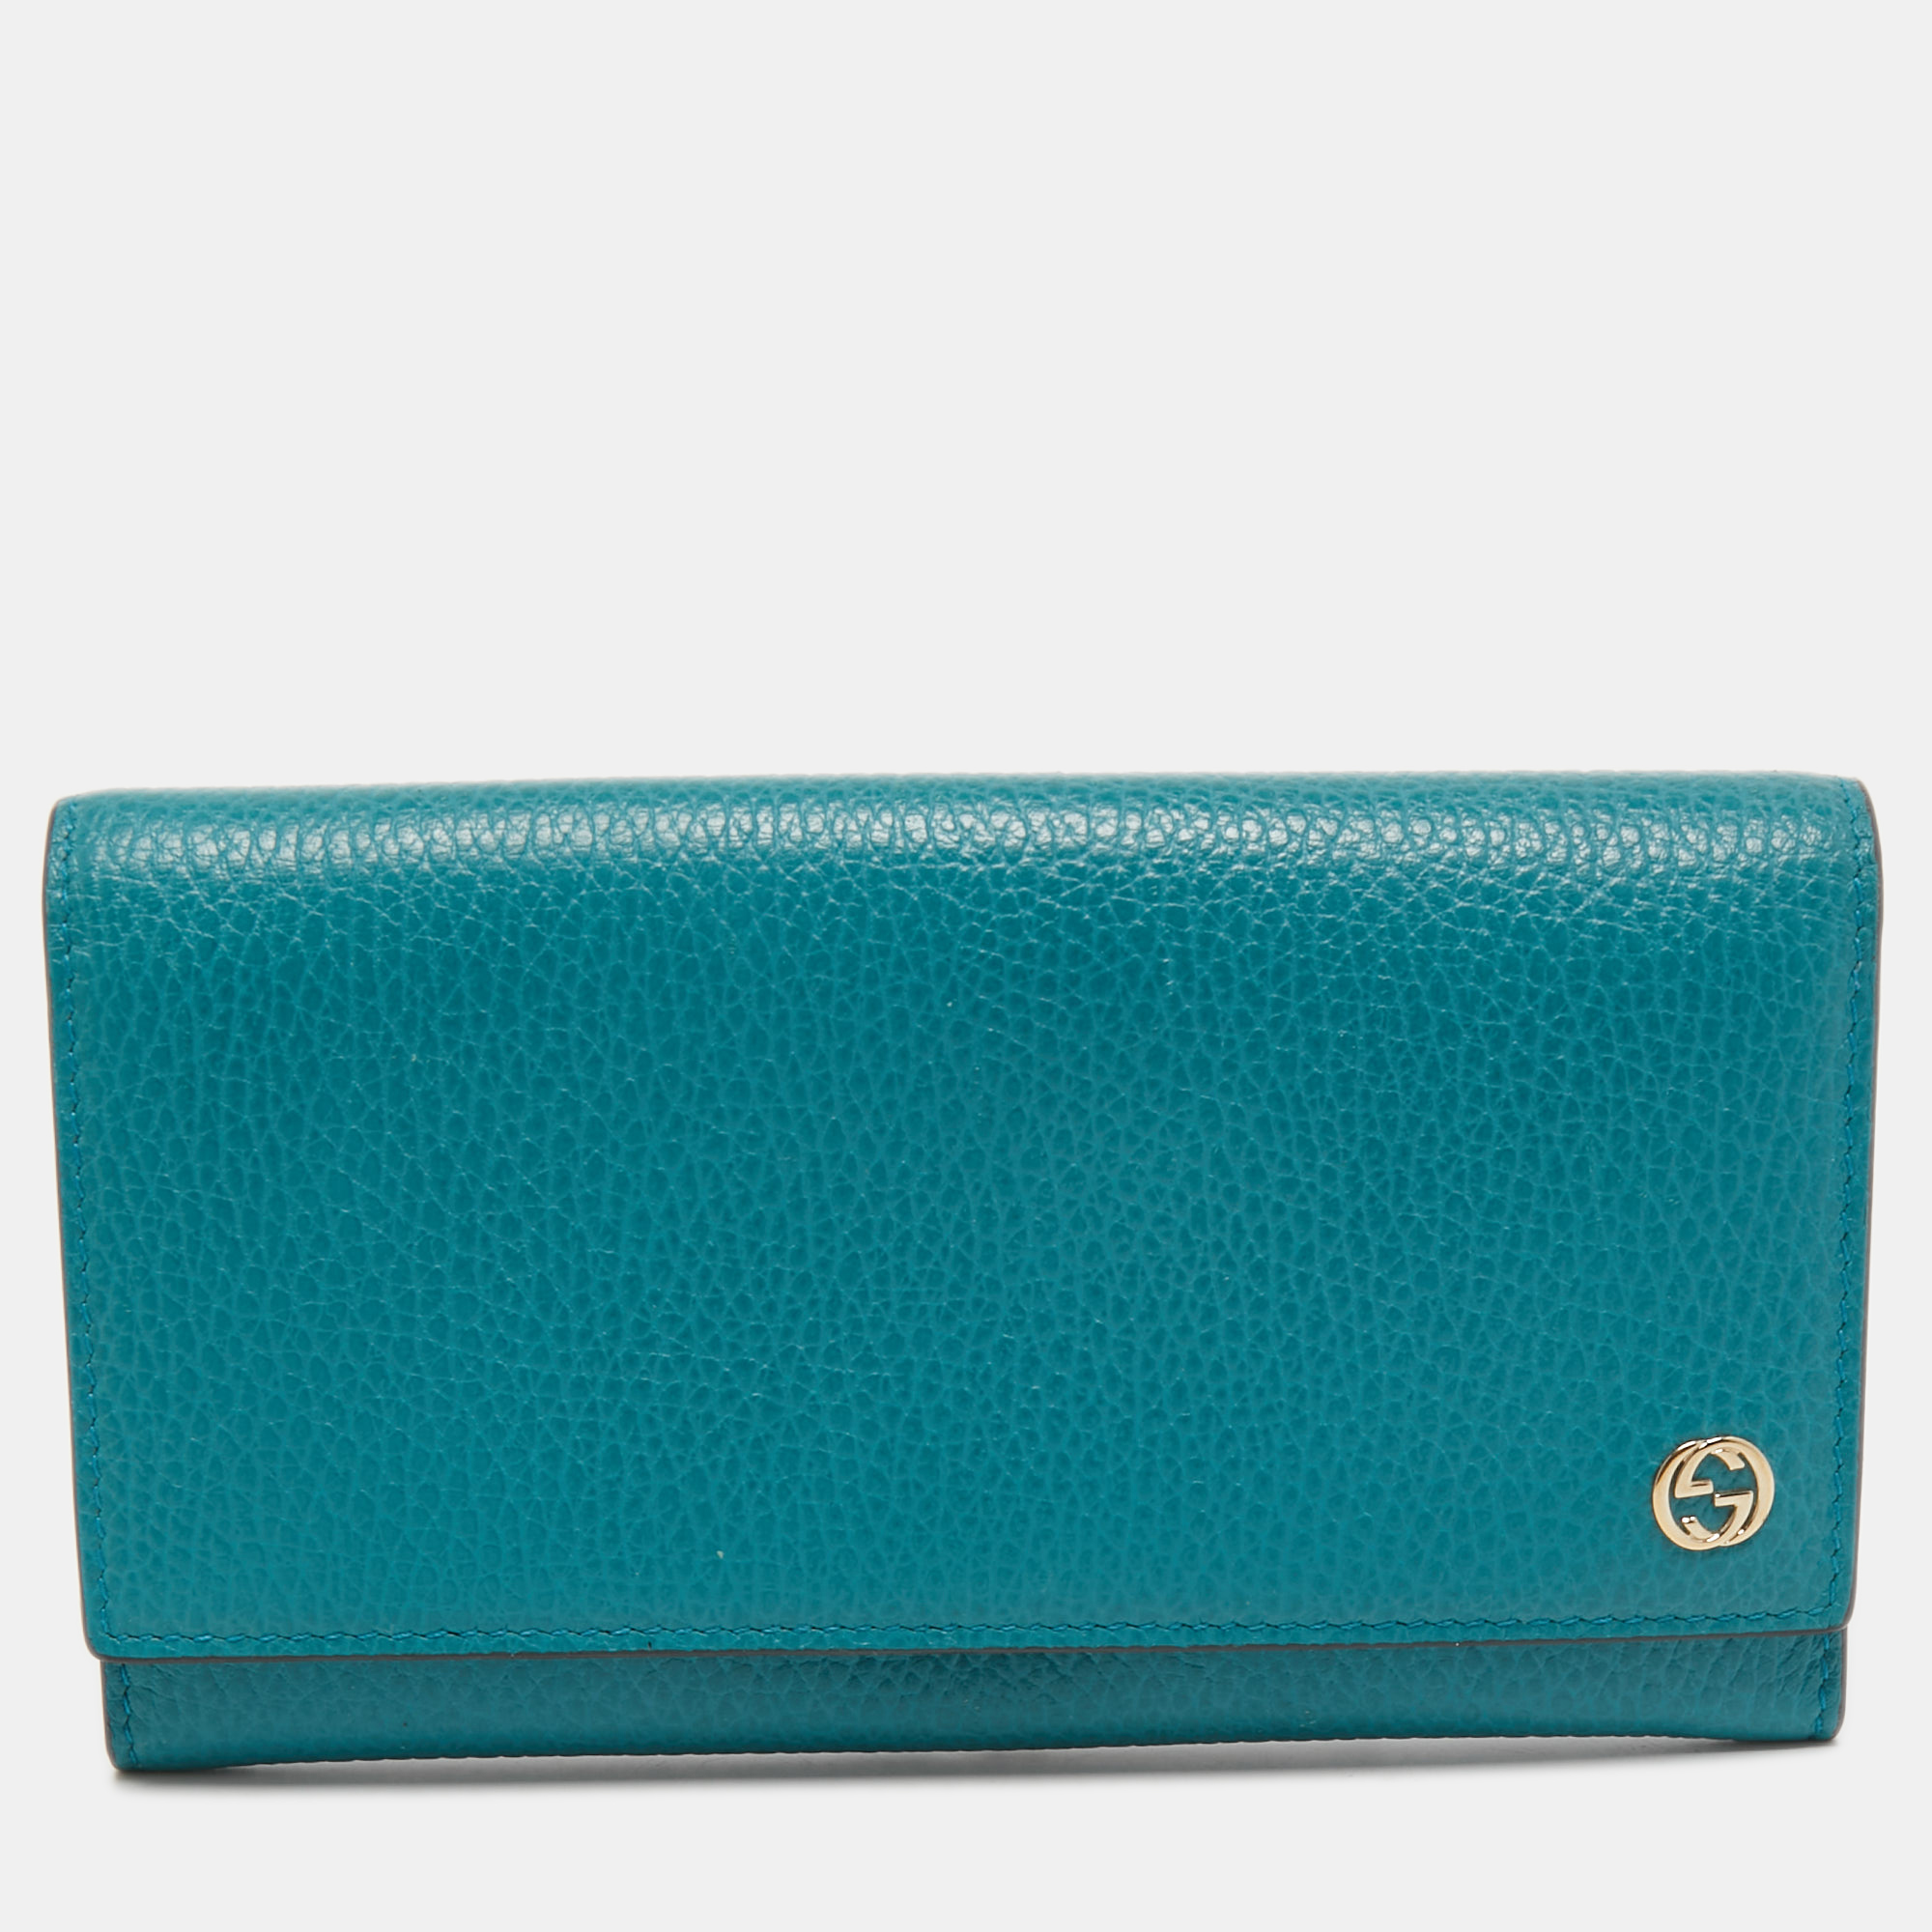 Pre-owned Gucci Blue Leather Flap Continental Wallet